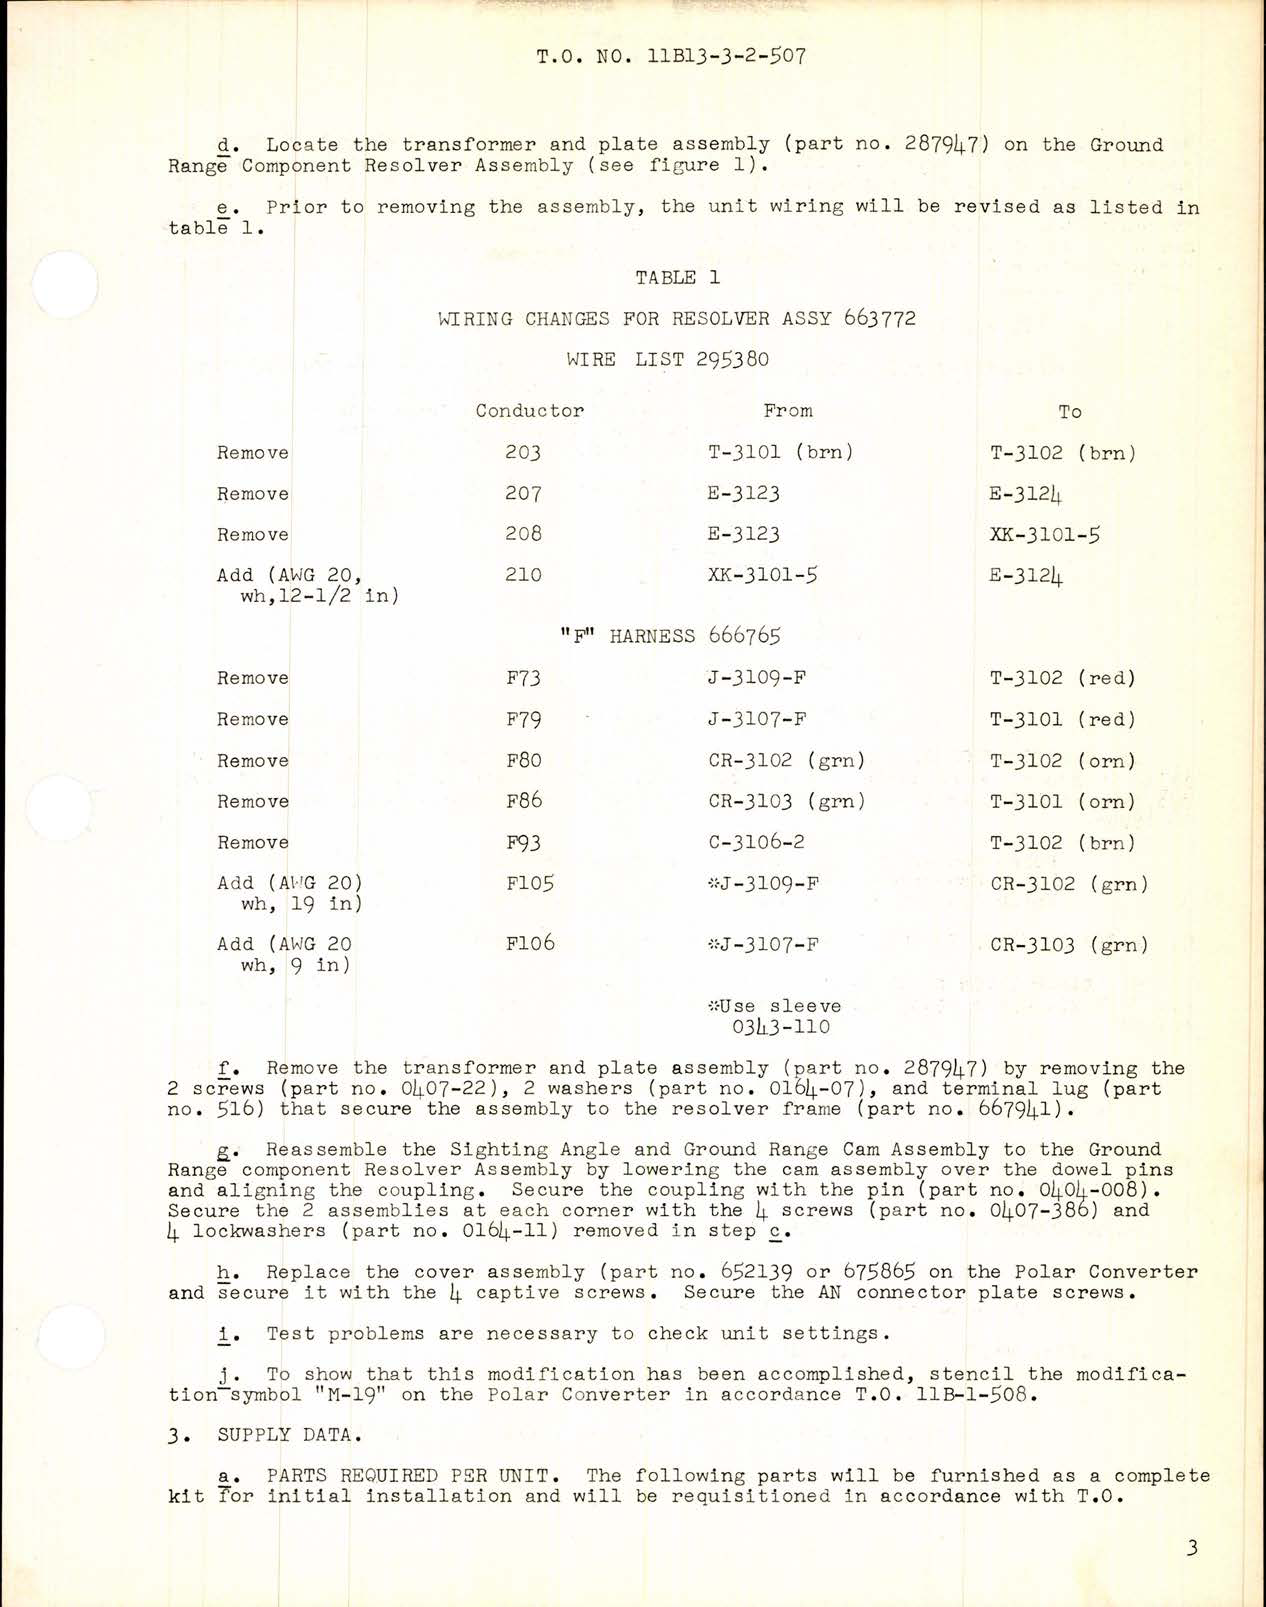 Sample page 3 from AirCorps Library document: Removal of Transformers T3101 and T3102